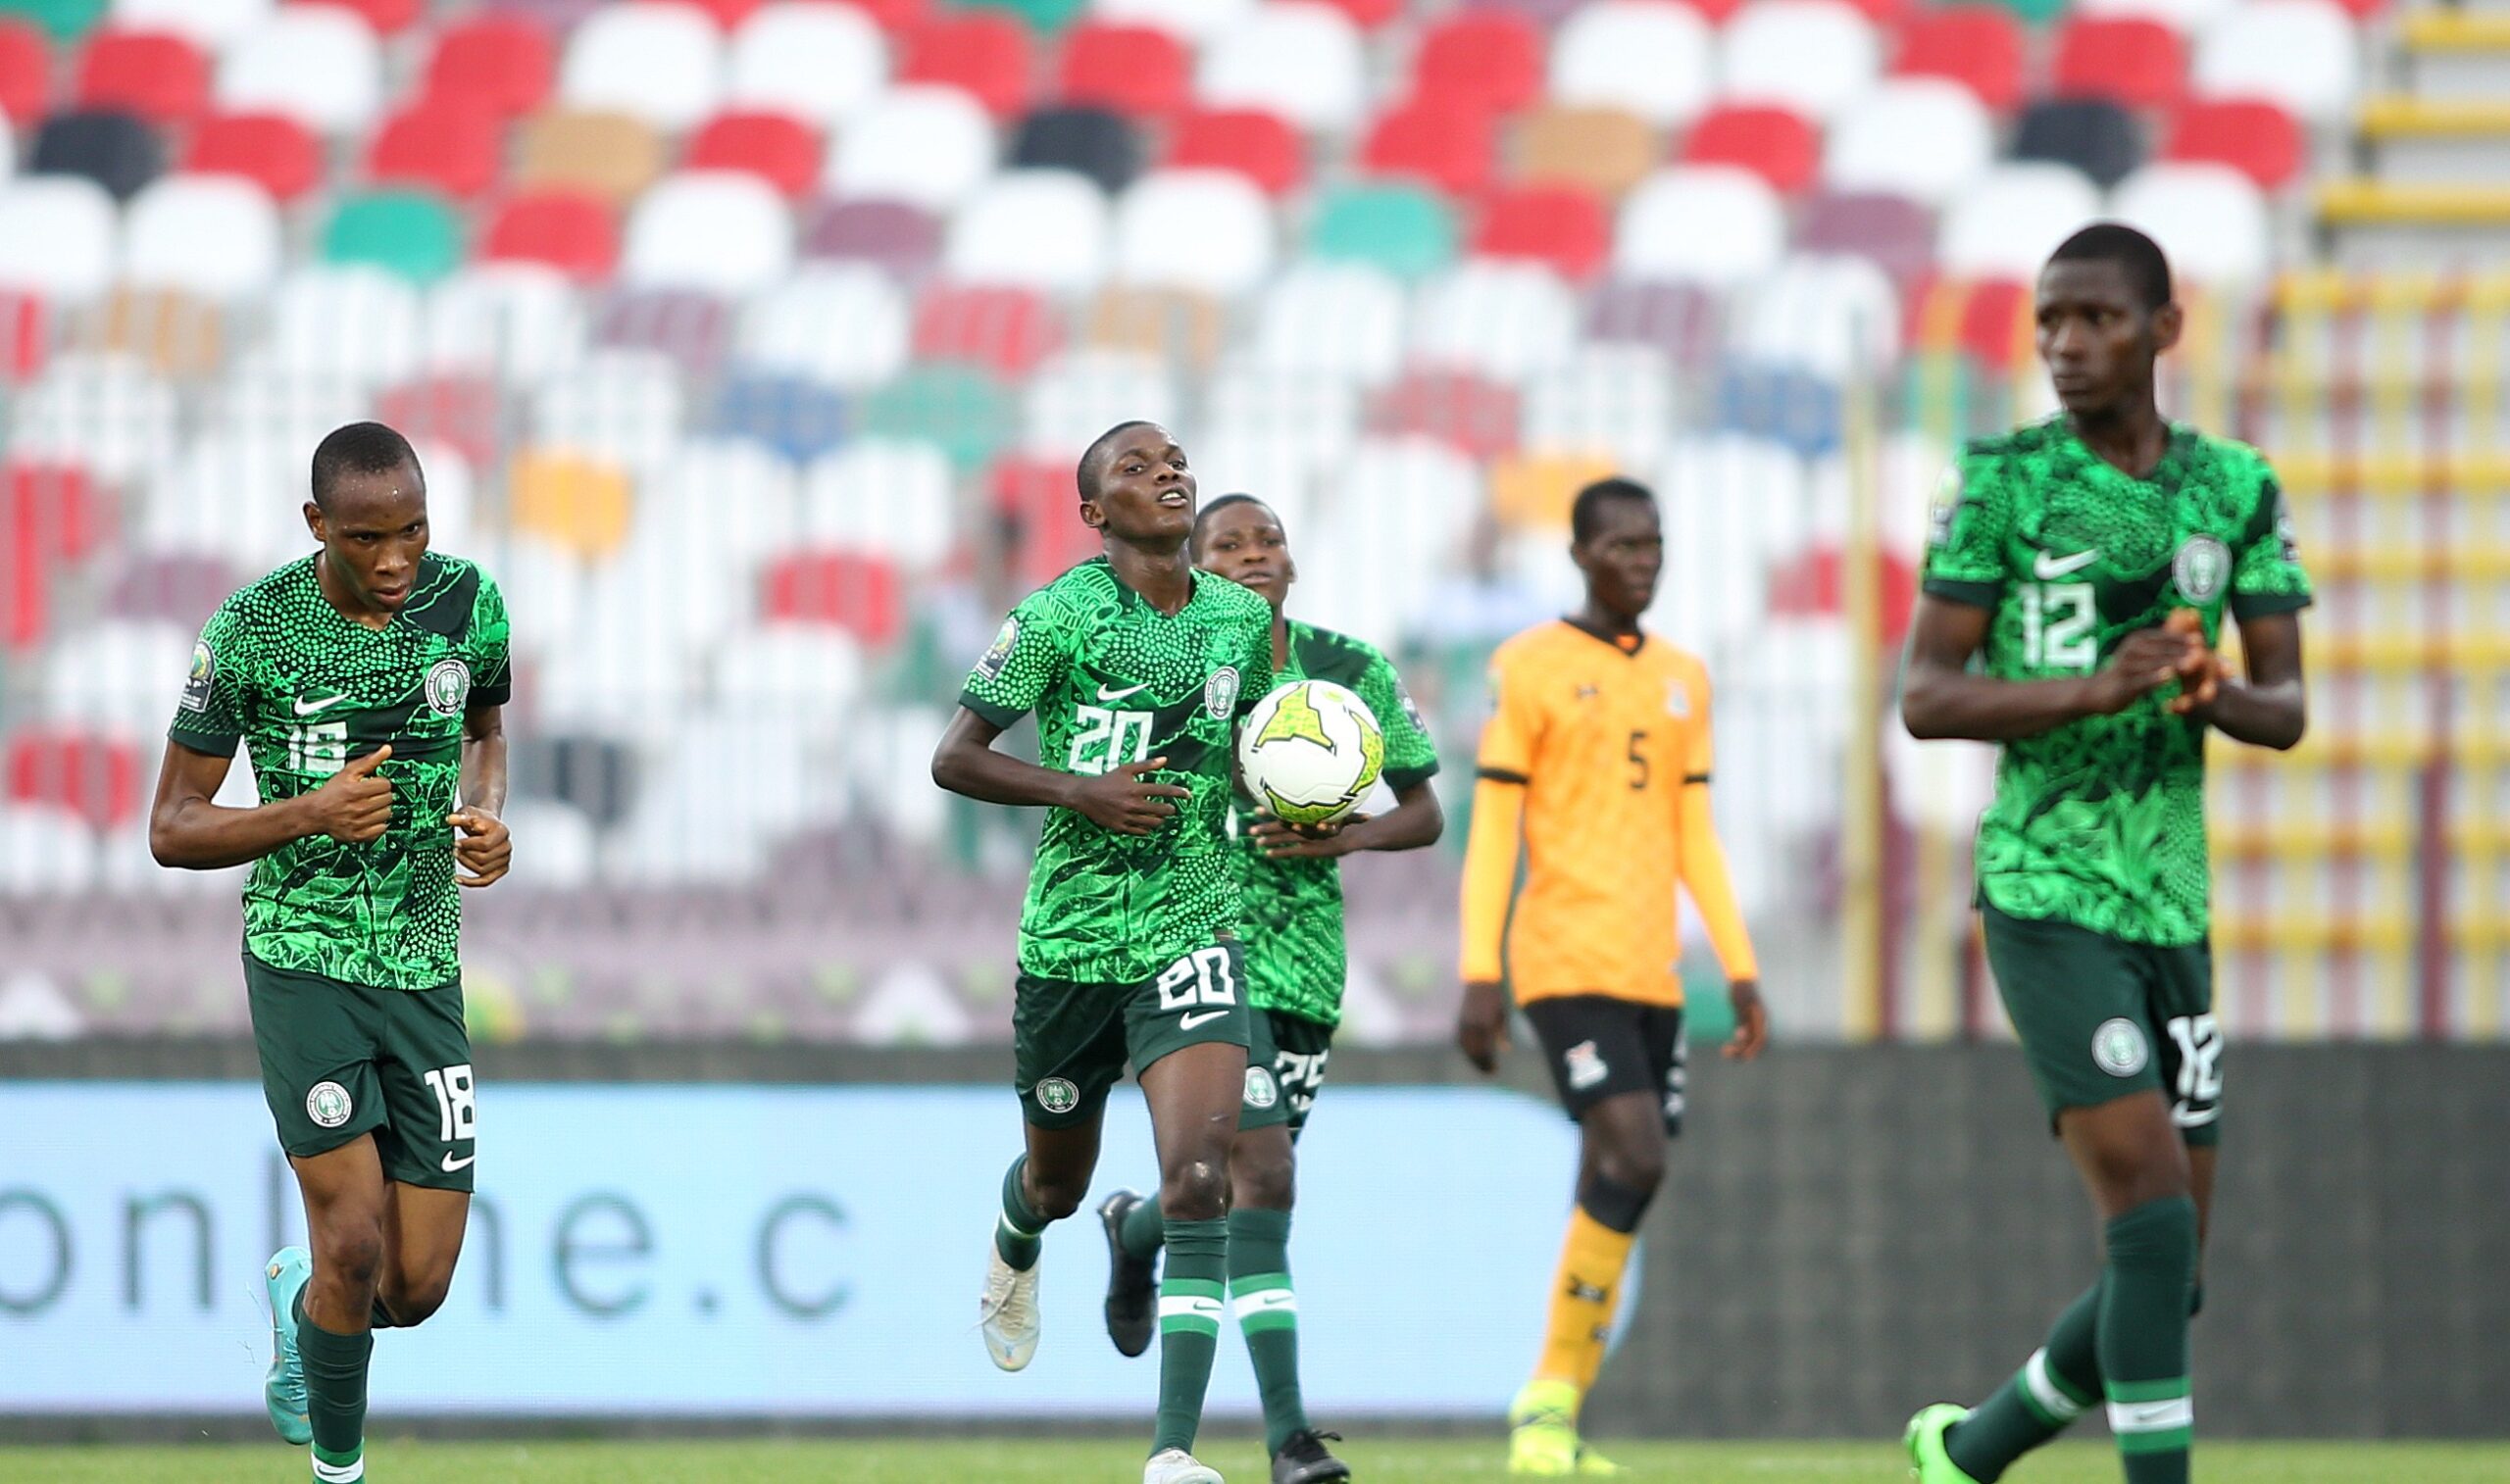 U17 AFCON How to watch Nigeria vs South Africa game